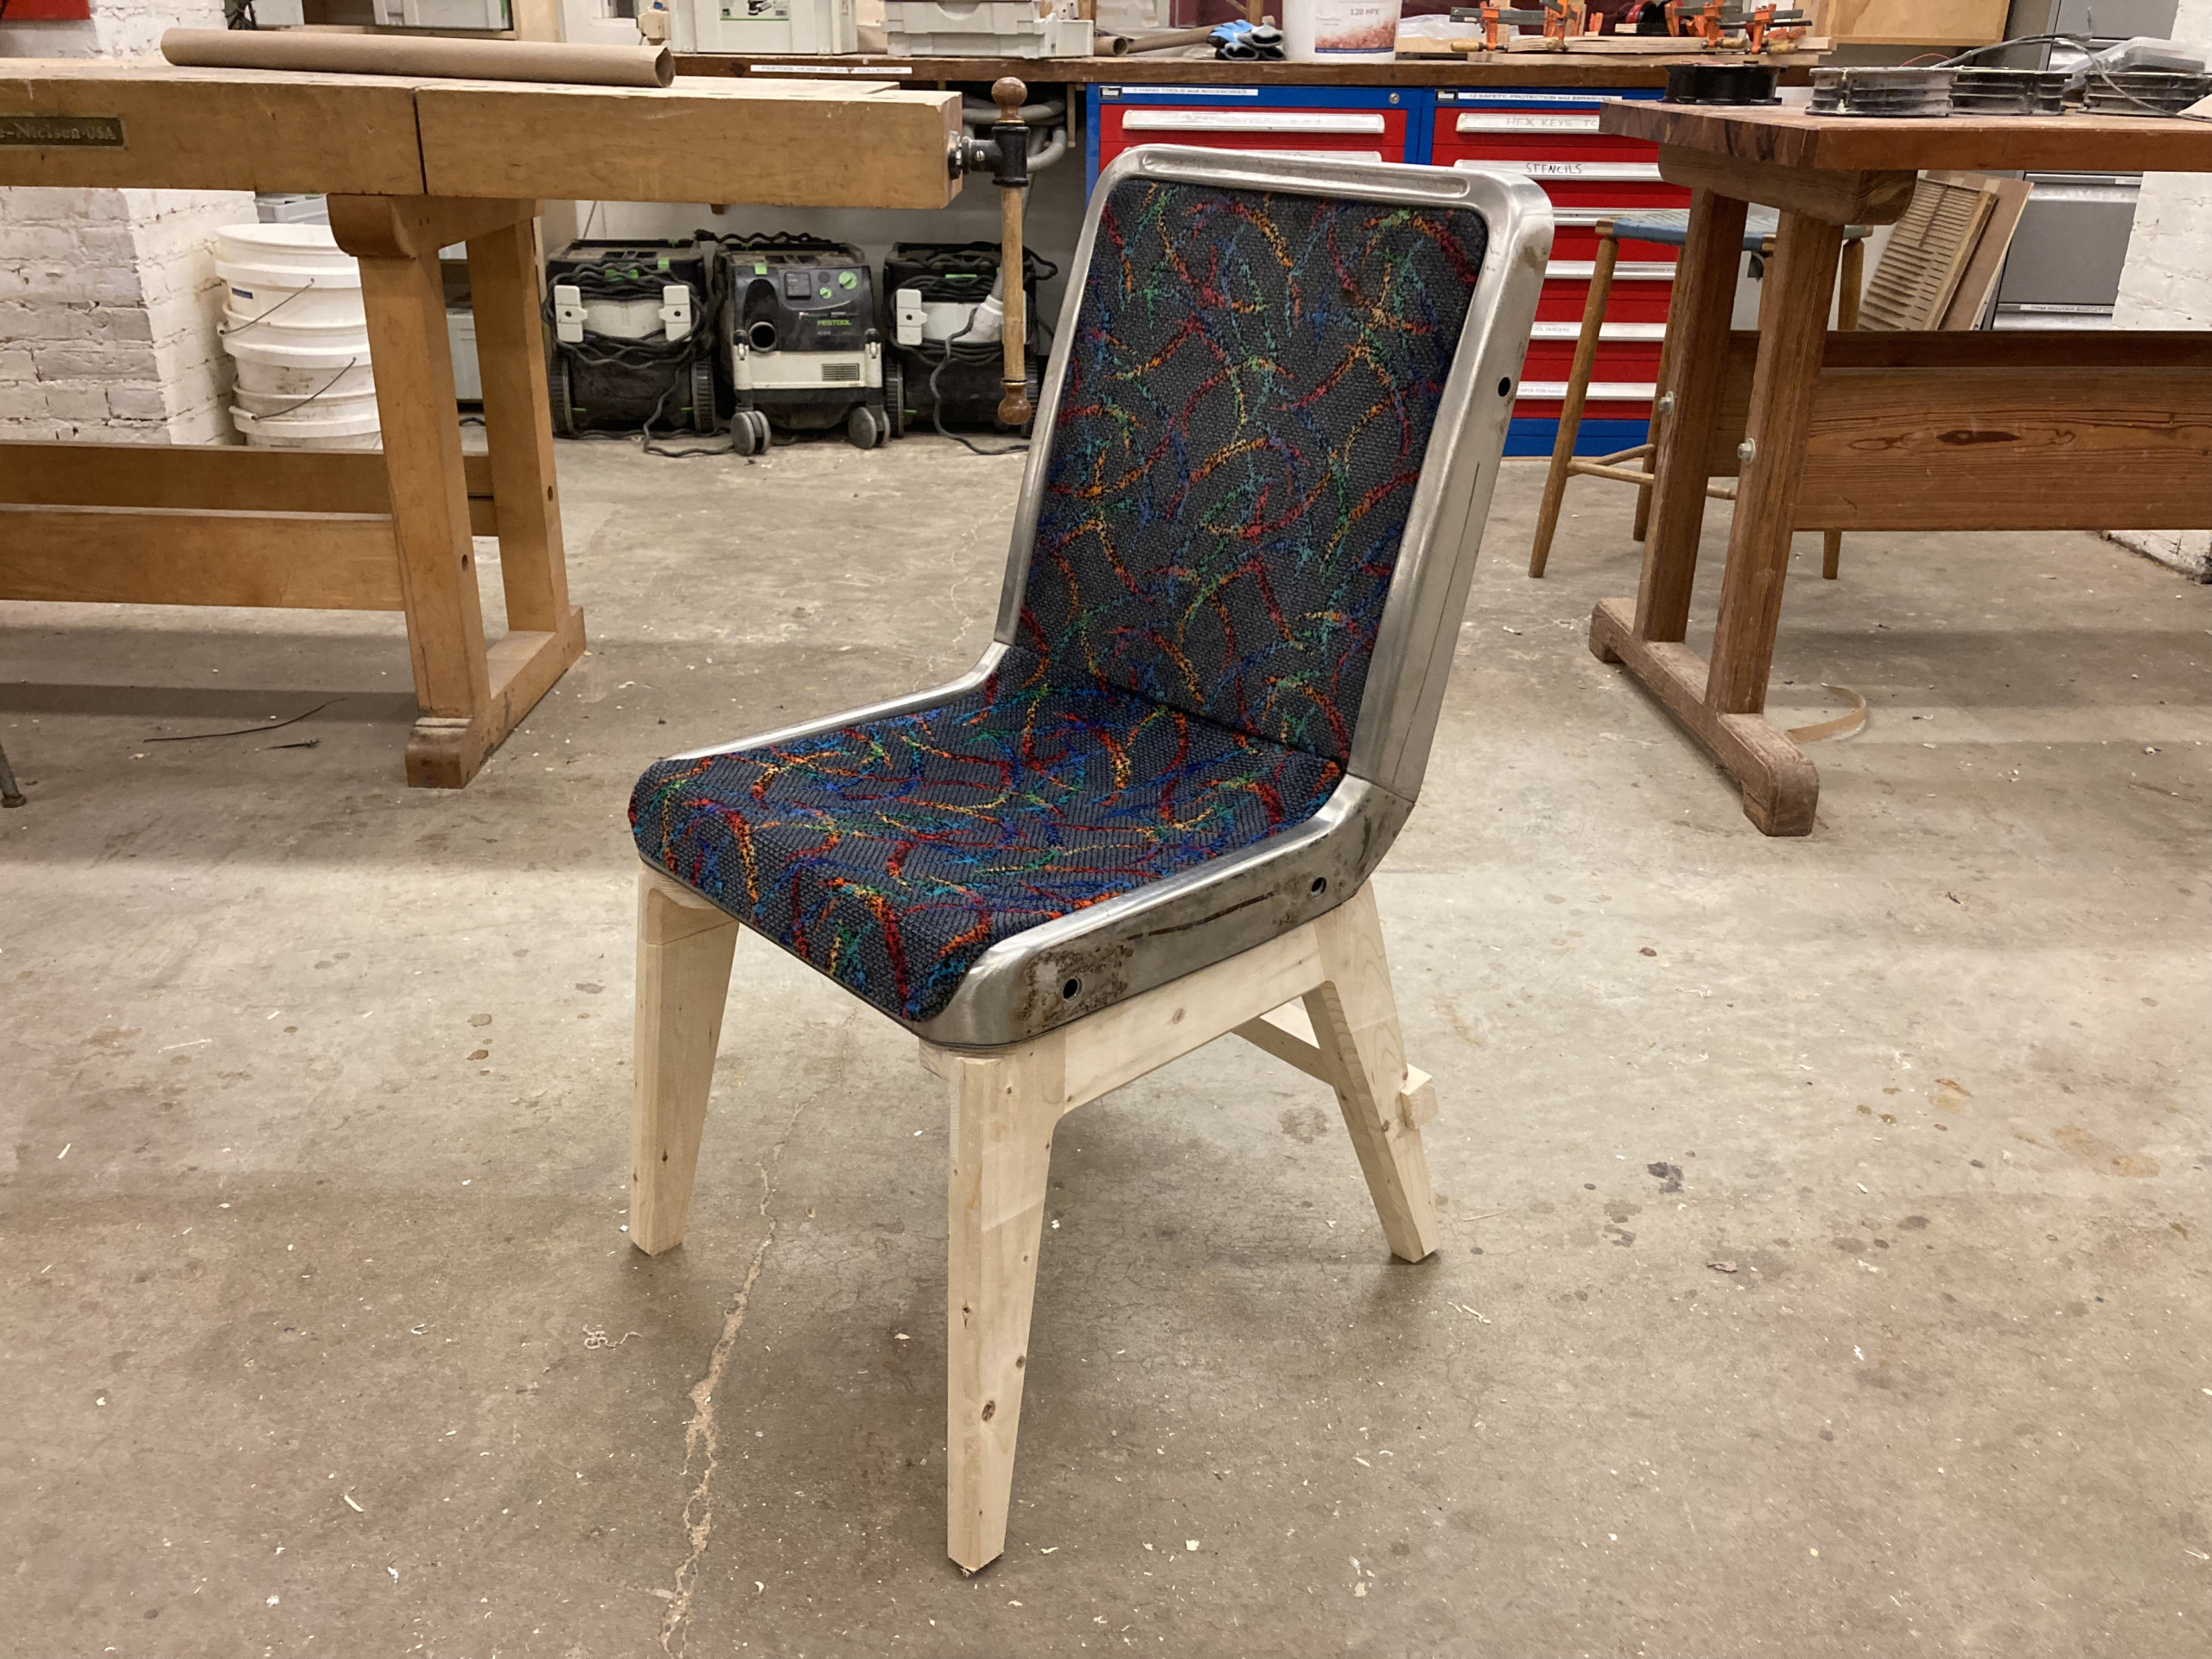 First prototype of the MBTA seat project.